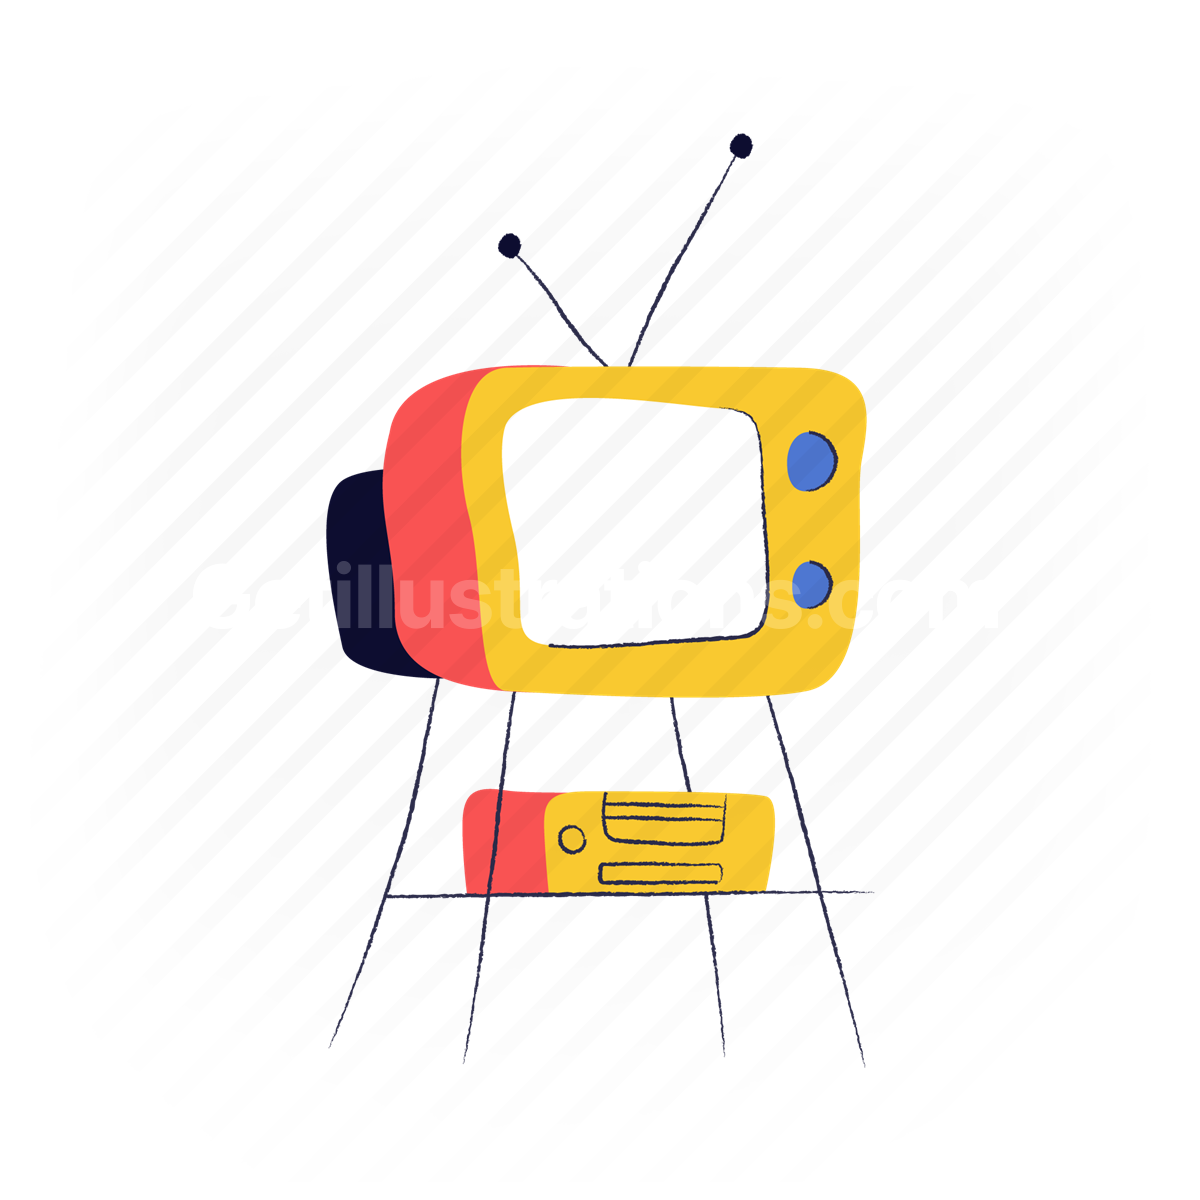 television, tv, electronic, device, monitor, screen